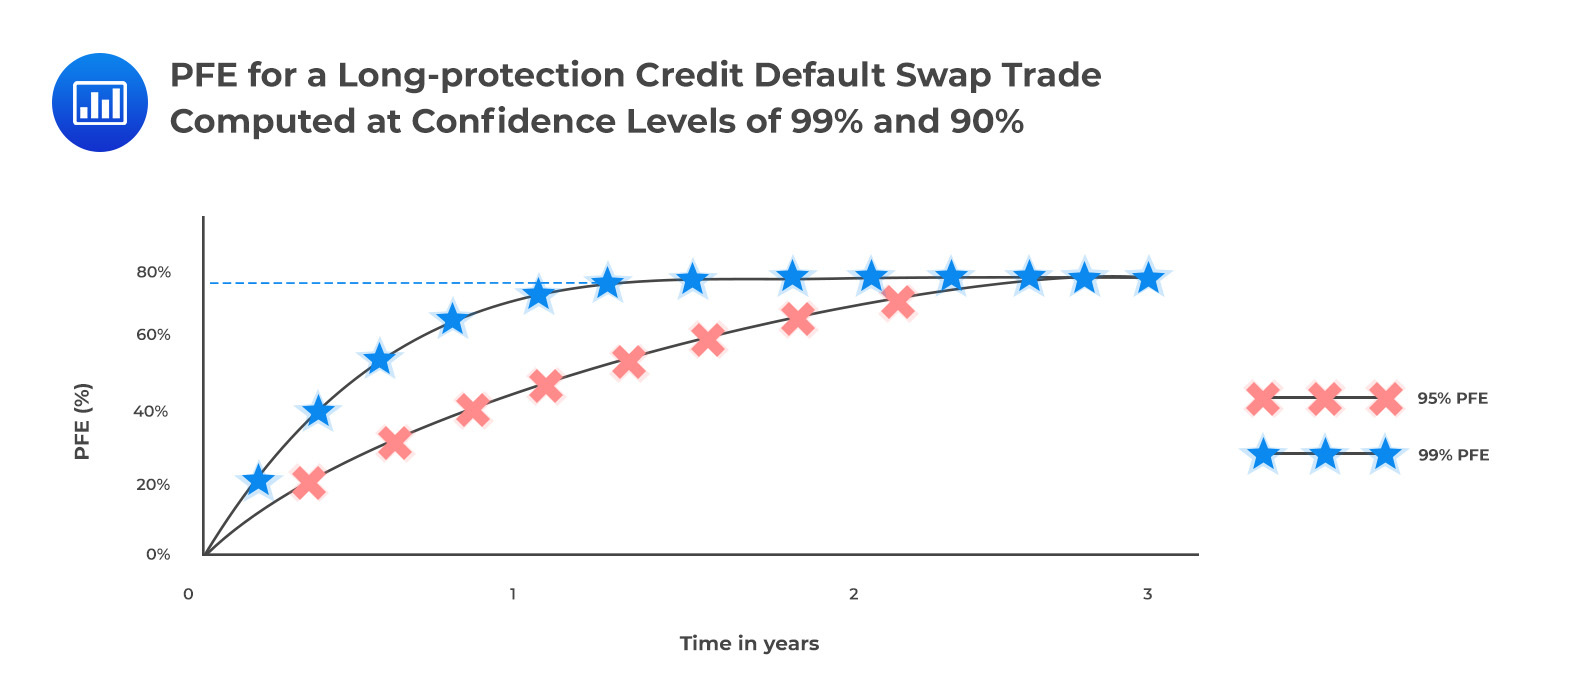 PFE for a Long-protection Credit Default Swap Trade Computed at Confidence Levels of 99% and 90%